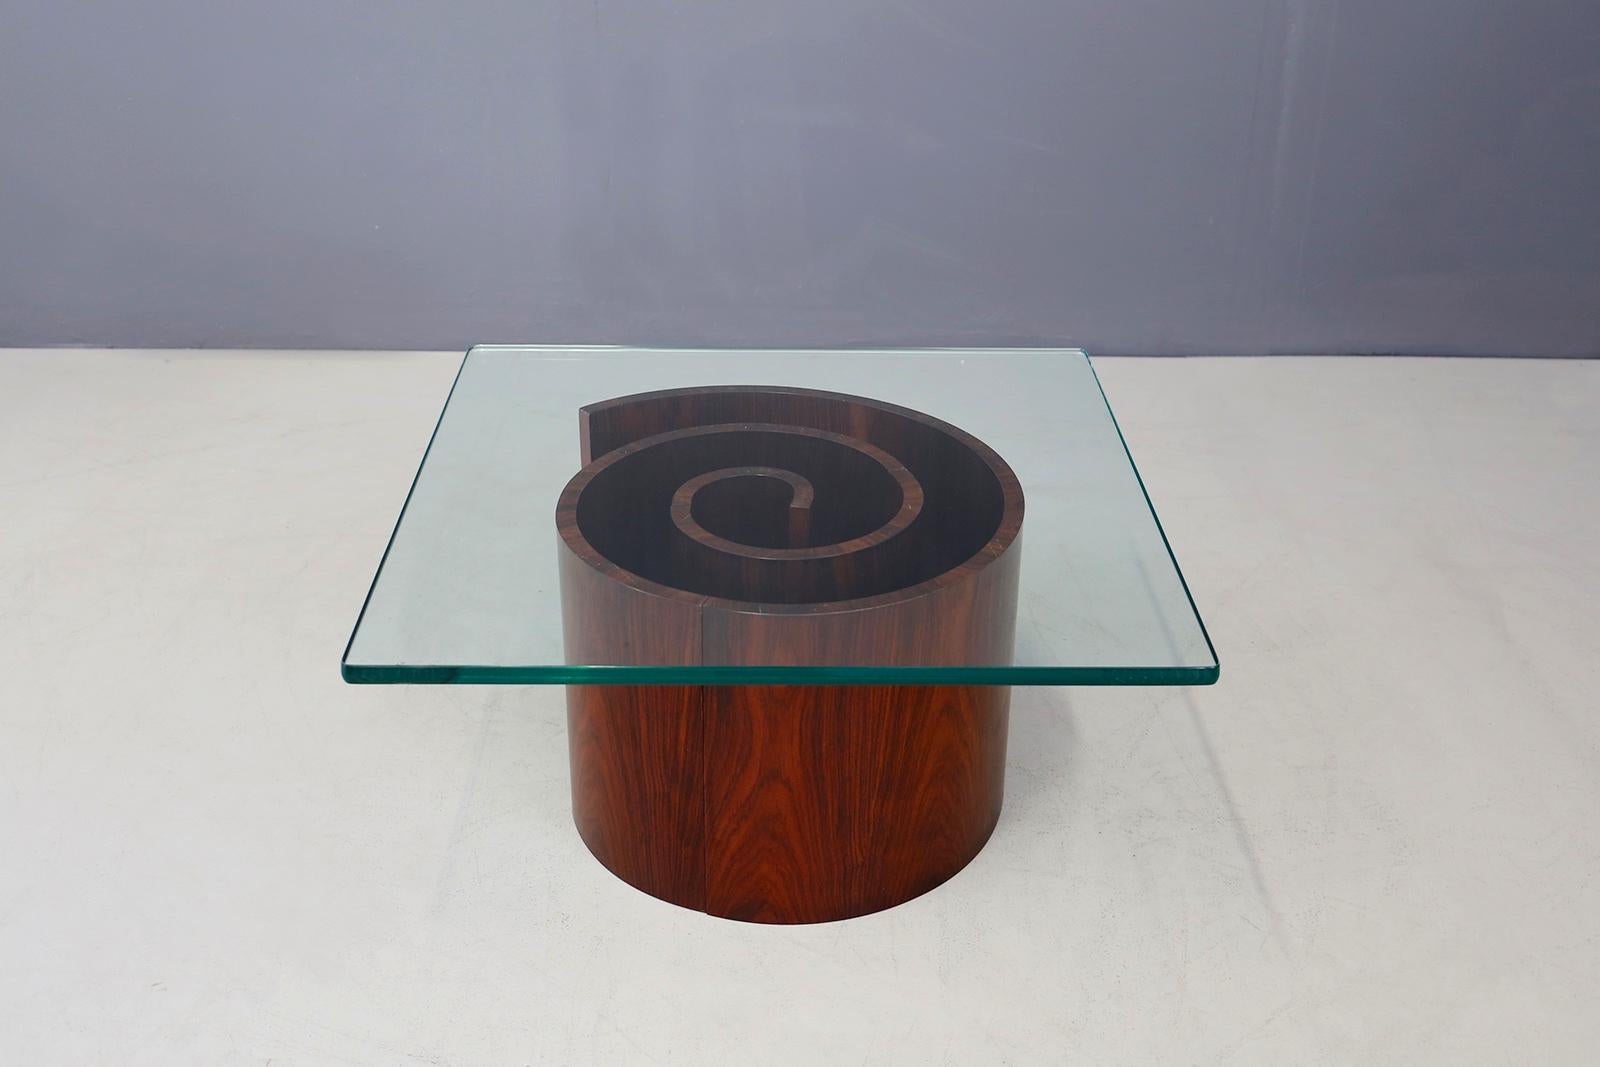 Elegant coffee table designed by designer Vladimir Kagan in 1960. The coffee table is called Lumaca because of the shape of its spiral base that recalls the structure of a Lumaca. The spiral base is made of walnut wood. Each of its curvatures is